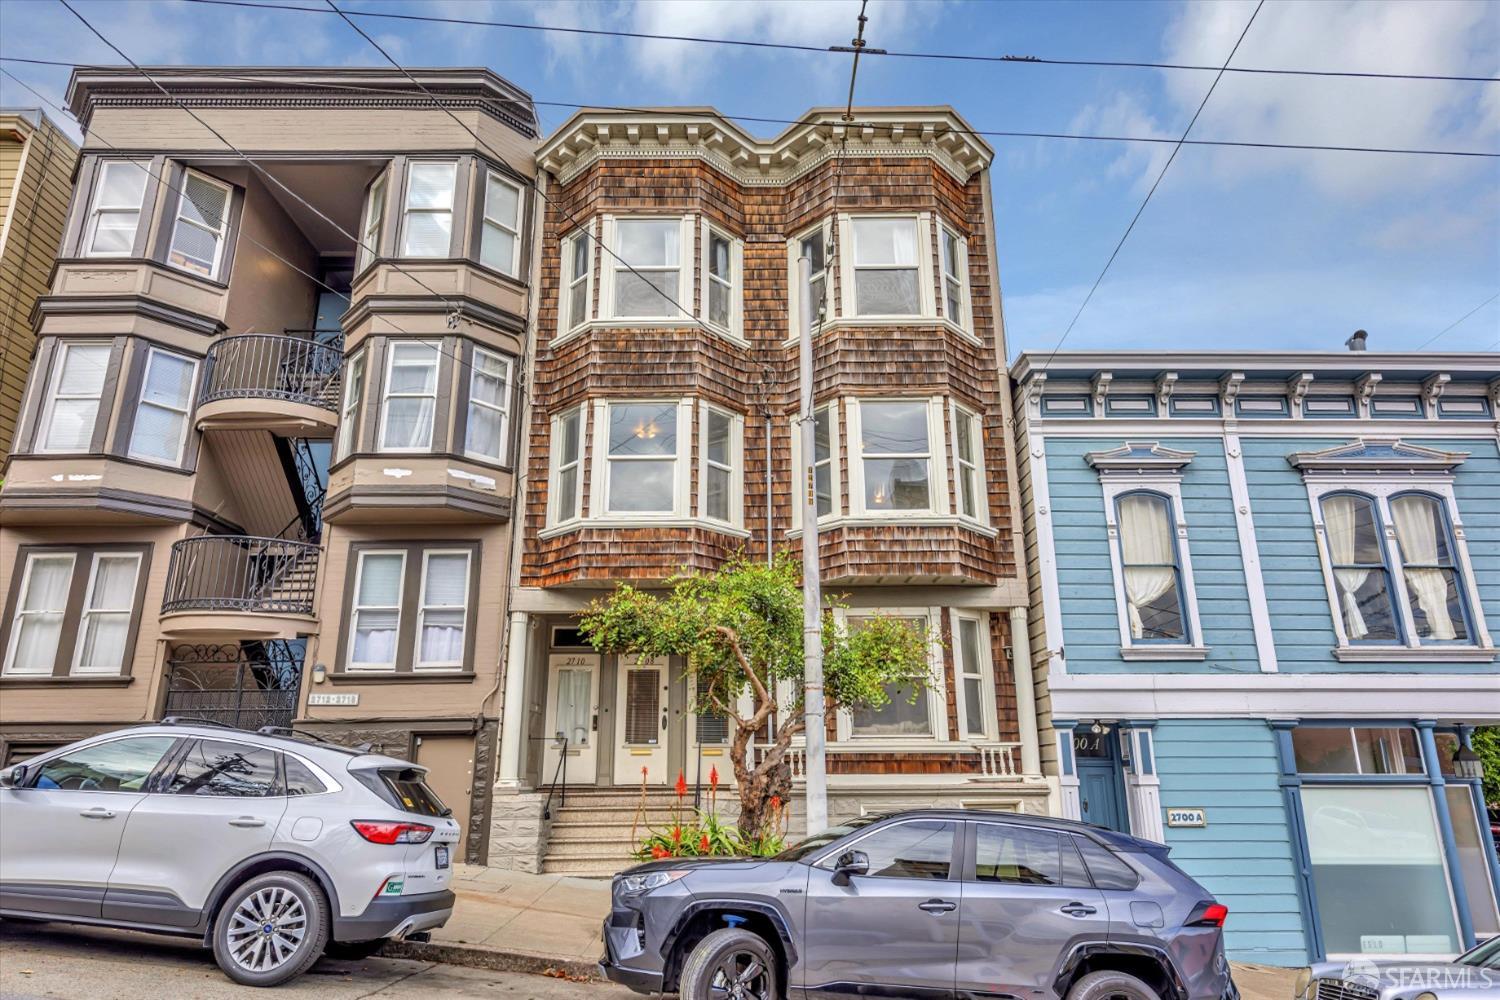 Photo of 2706 Sutter St in San Francisco, CA